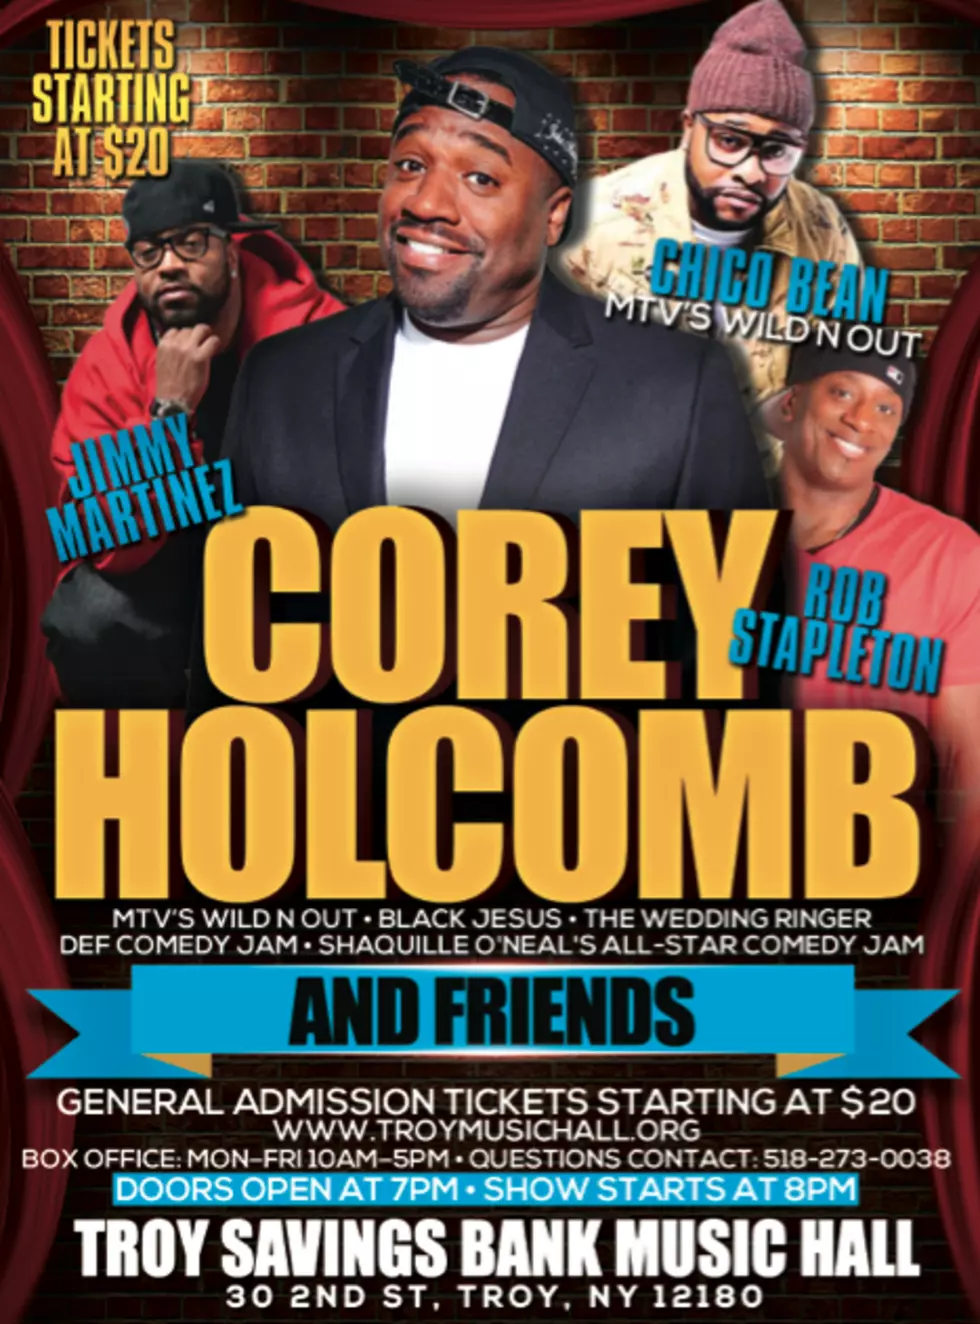 Win Tickets To See Comedian Corey Holcomb